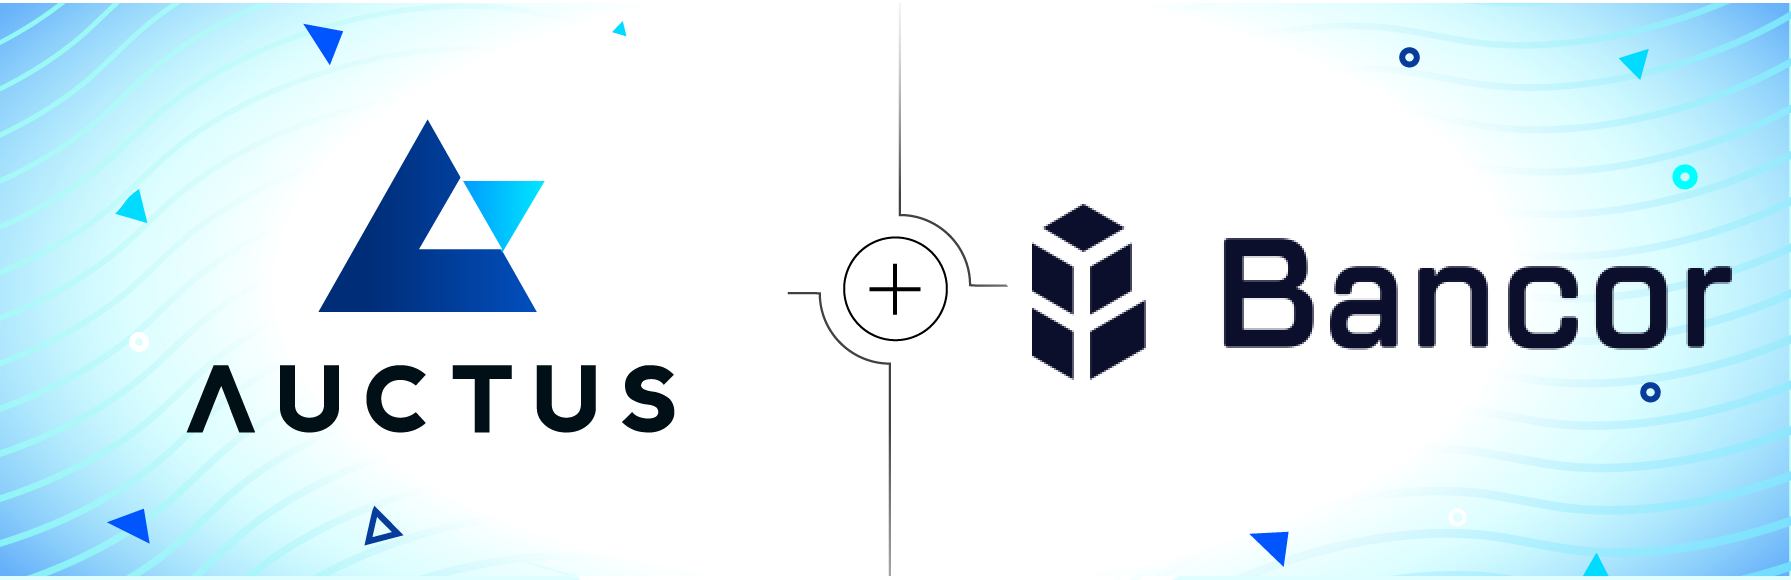 Auctus Integrating Bancor Protocol™ to Provide Continuous Liquidity for AUC Token